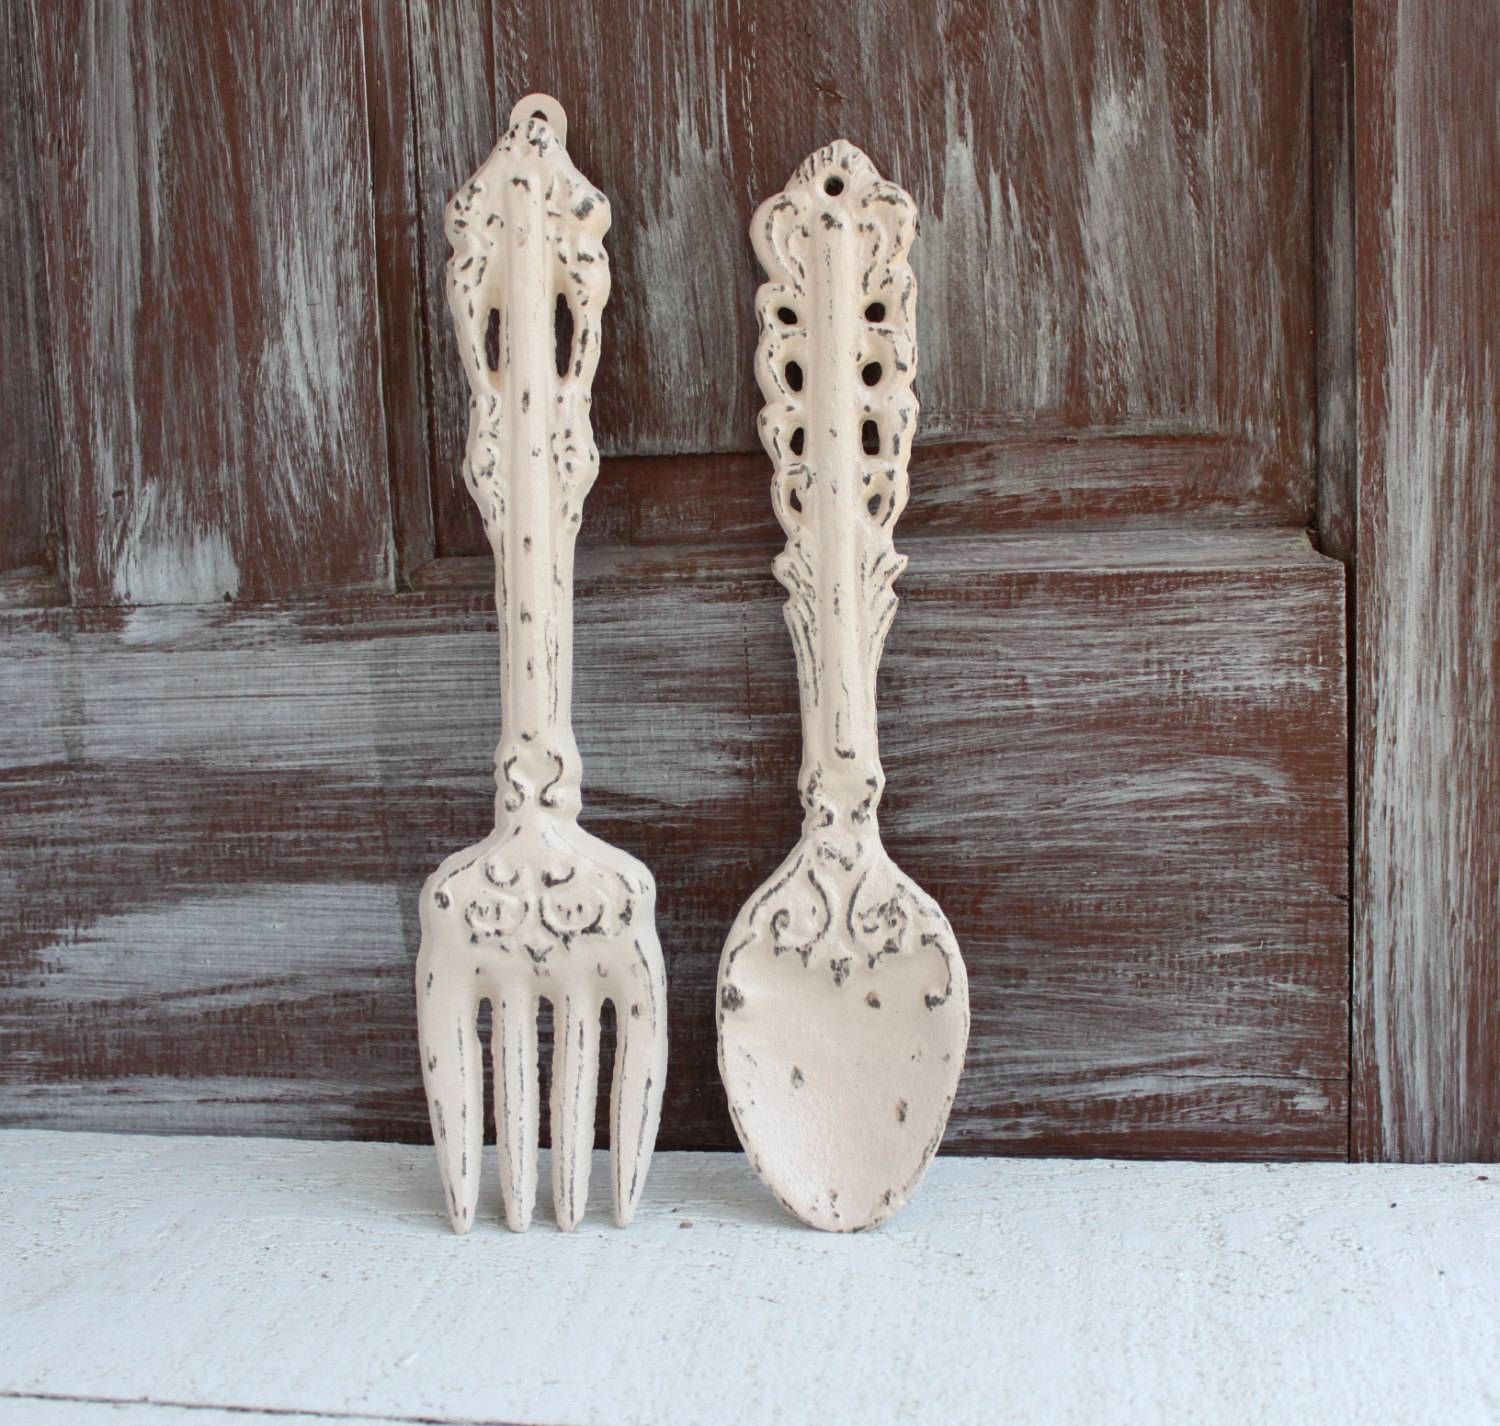 Large Ivory Fork And Spoon Kitchen Wall Decor Oversized For Current Oversized Cutlery Wall Art (View 10 of 20)